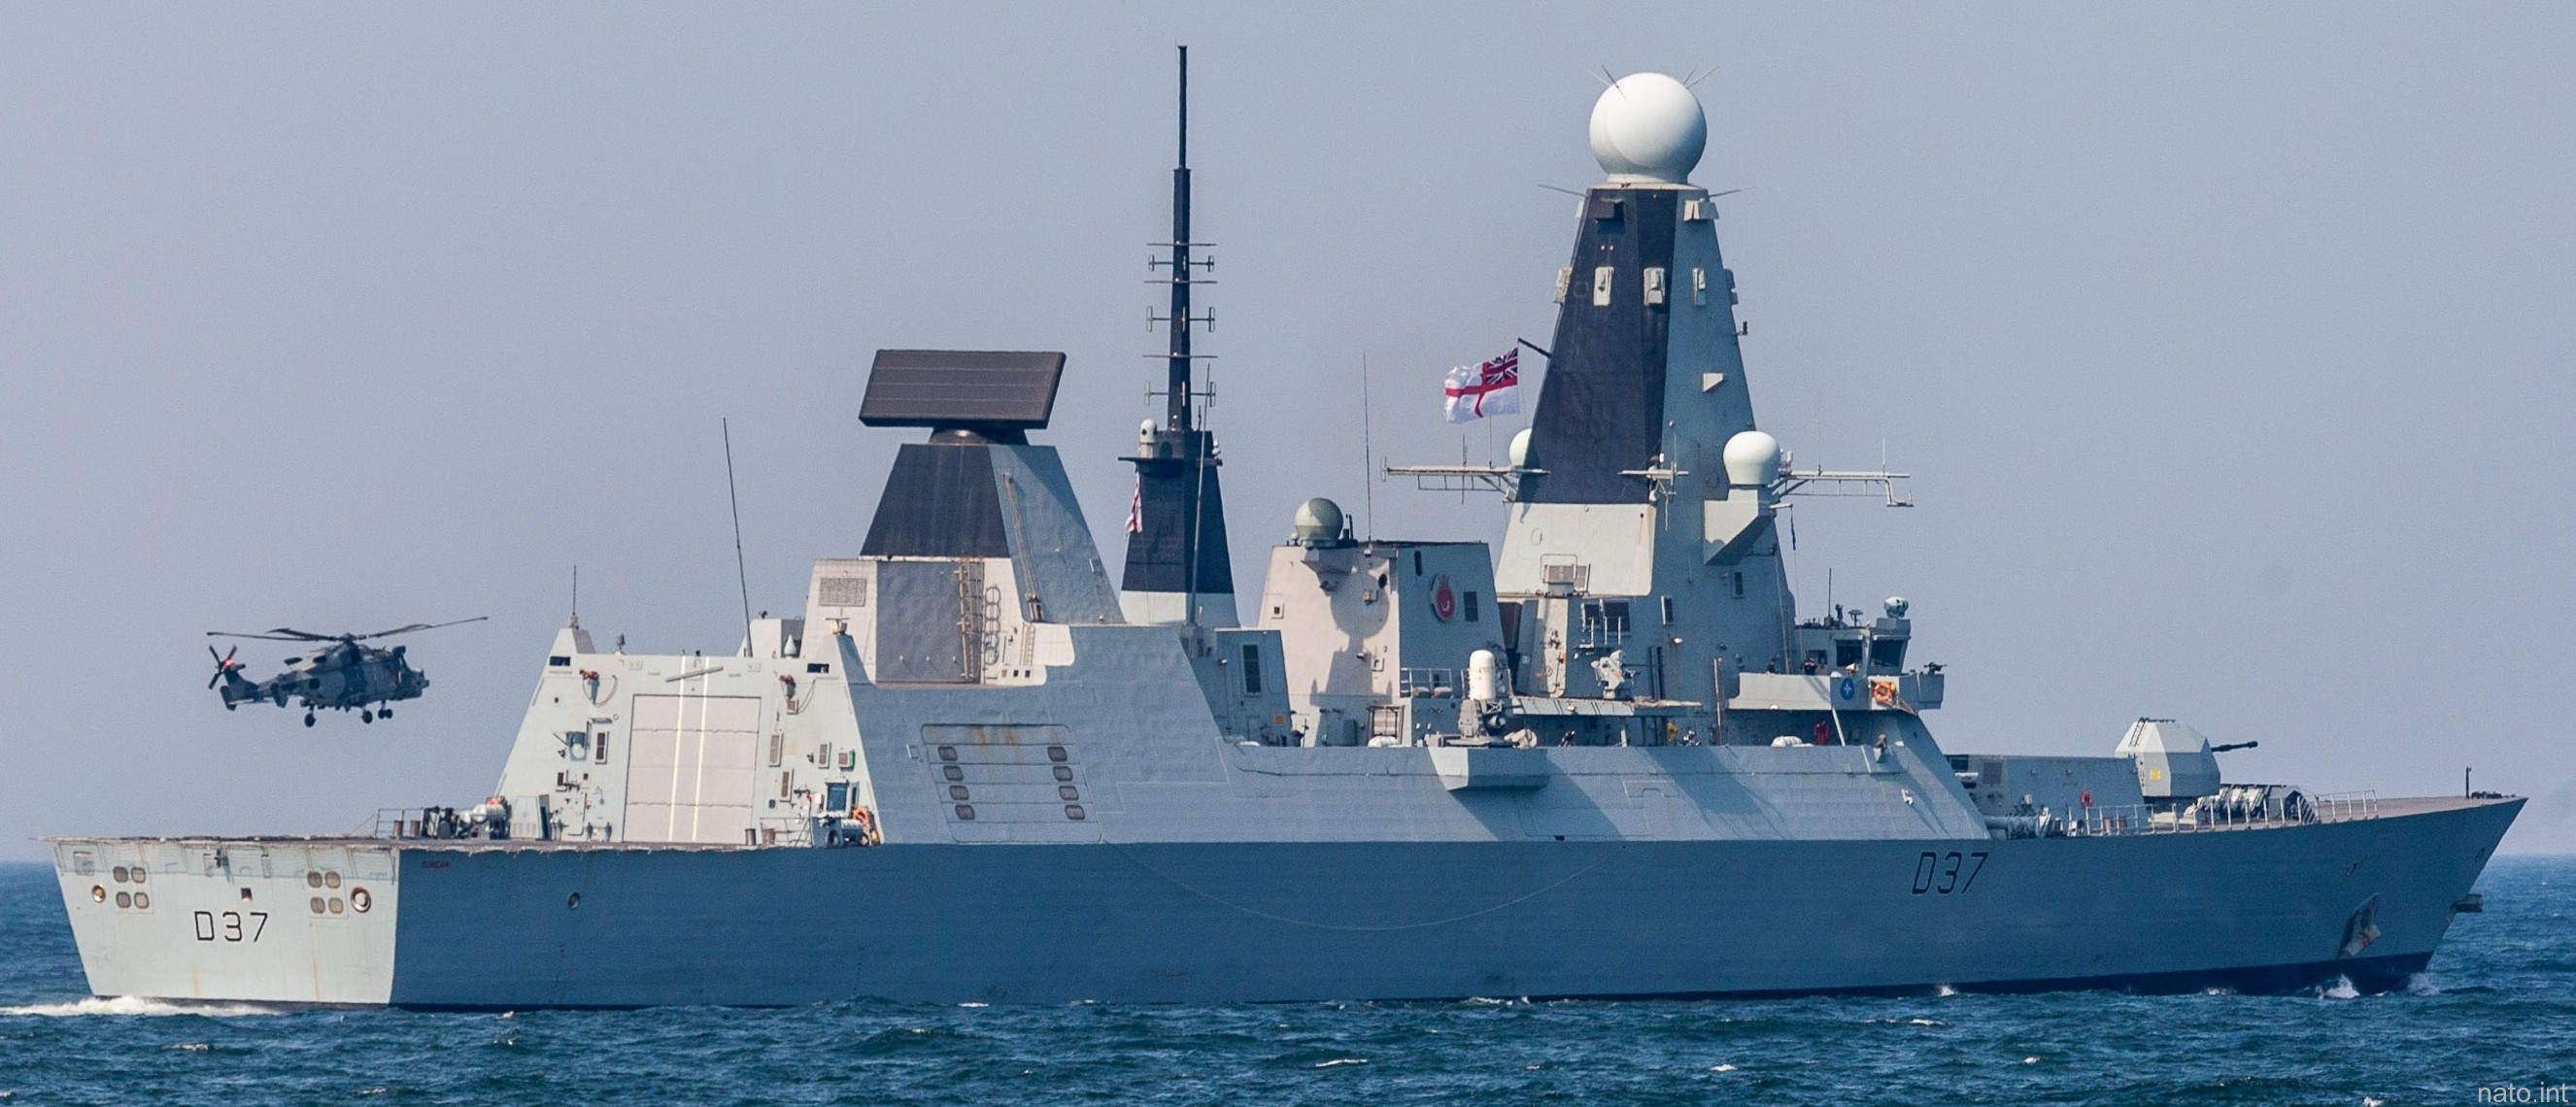 d37 hms duncan d-37 type 45 daring class guided missile destroyer ddg royal navy sea viper wildcat helicopter 36